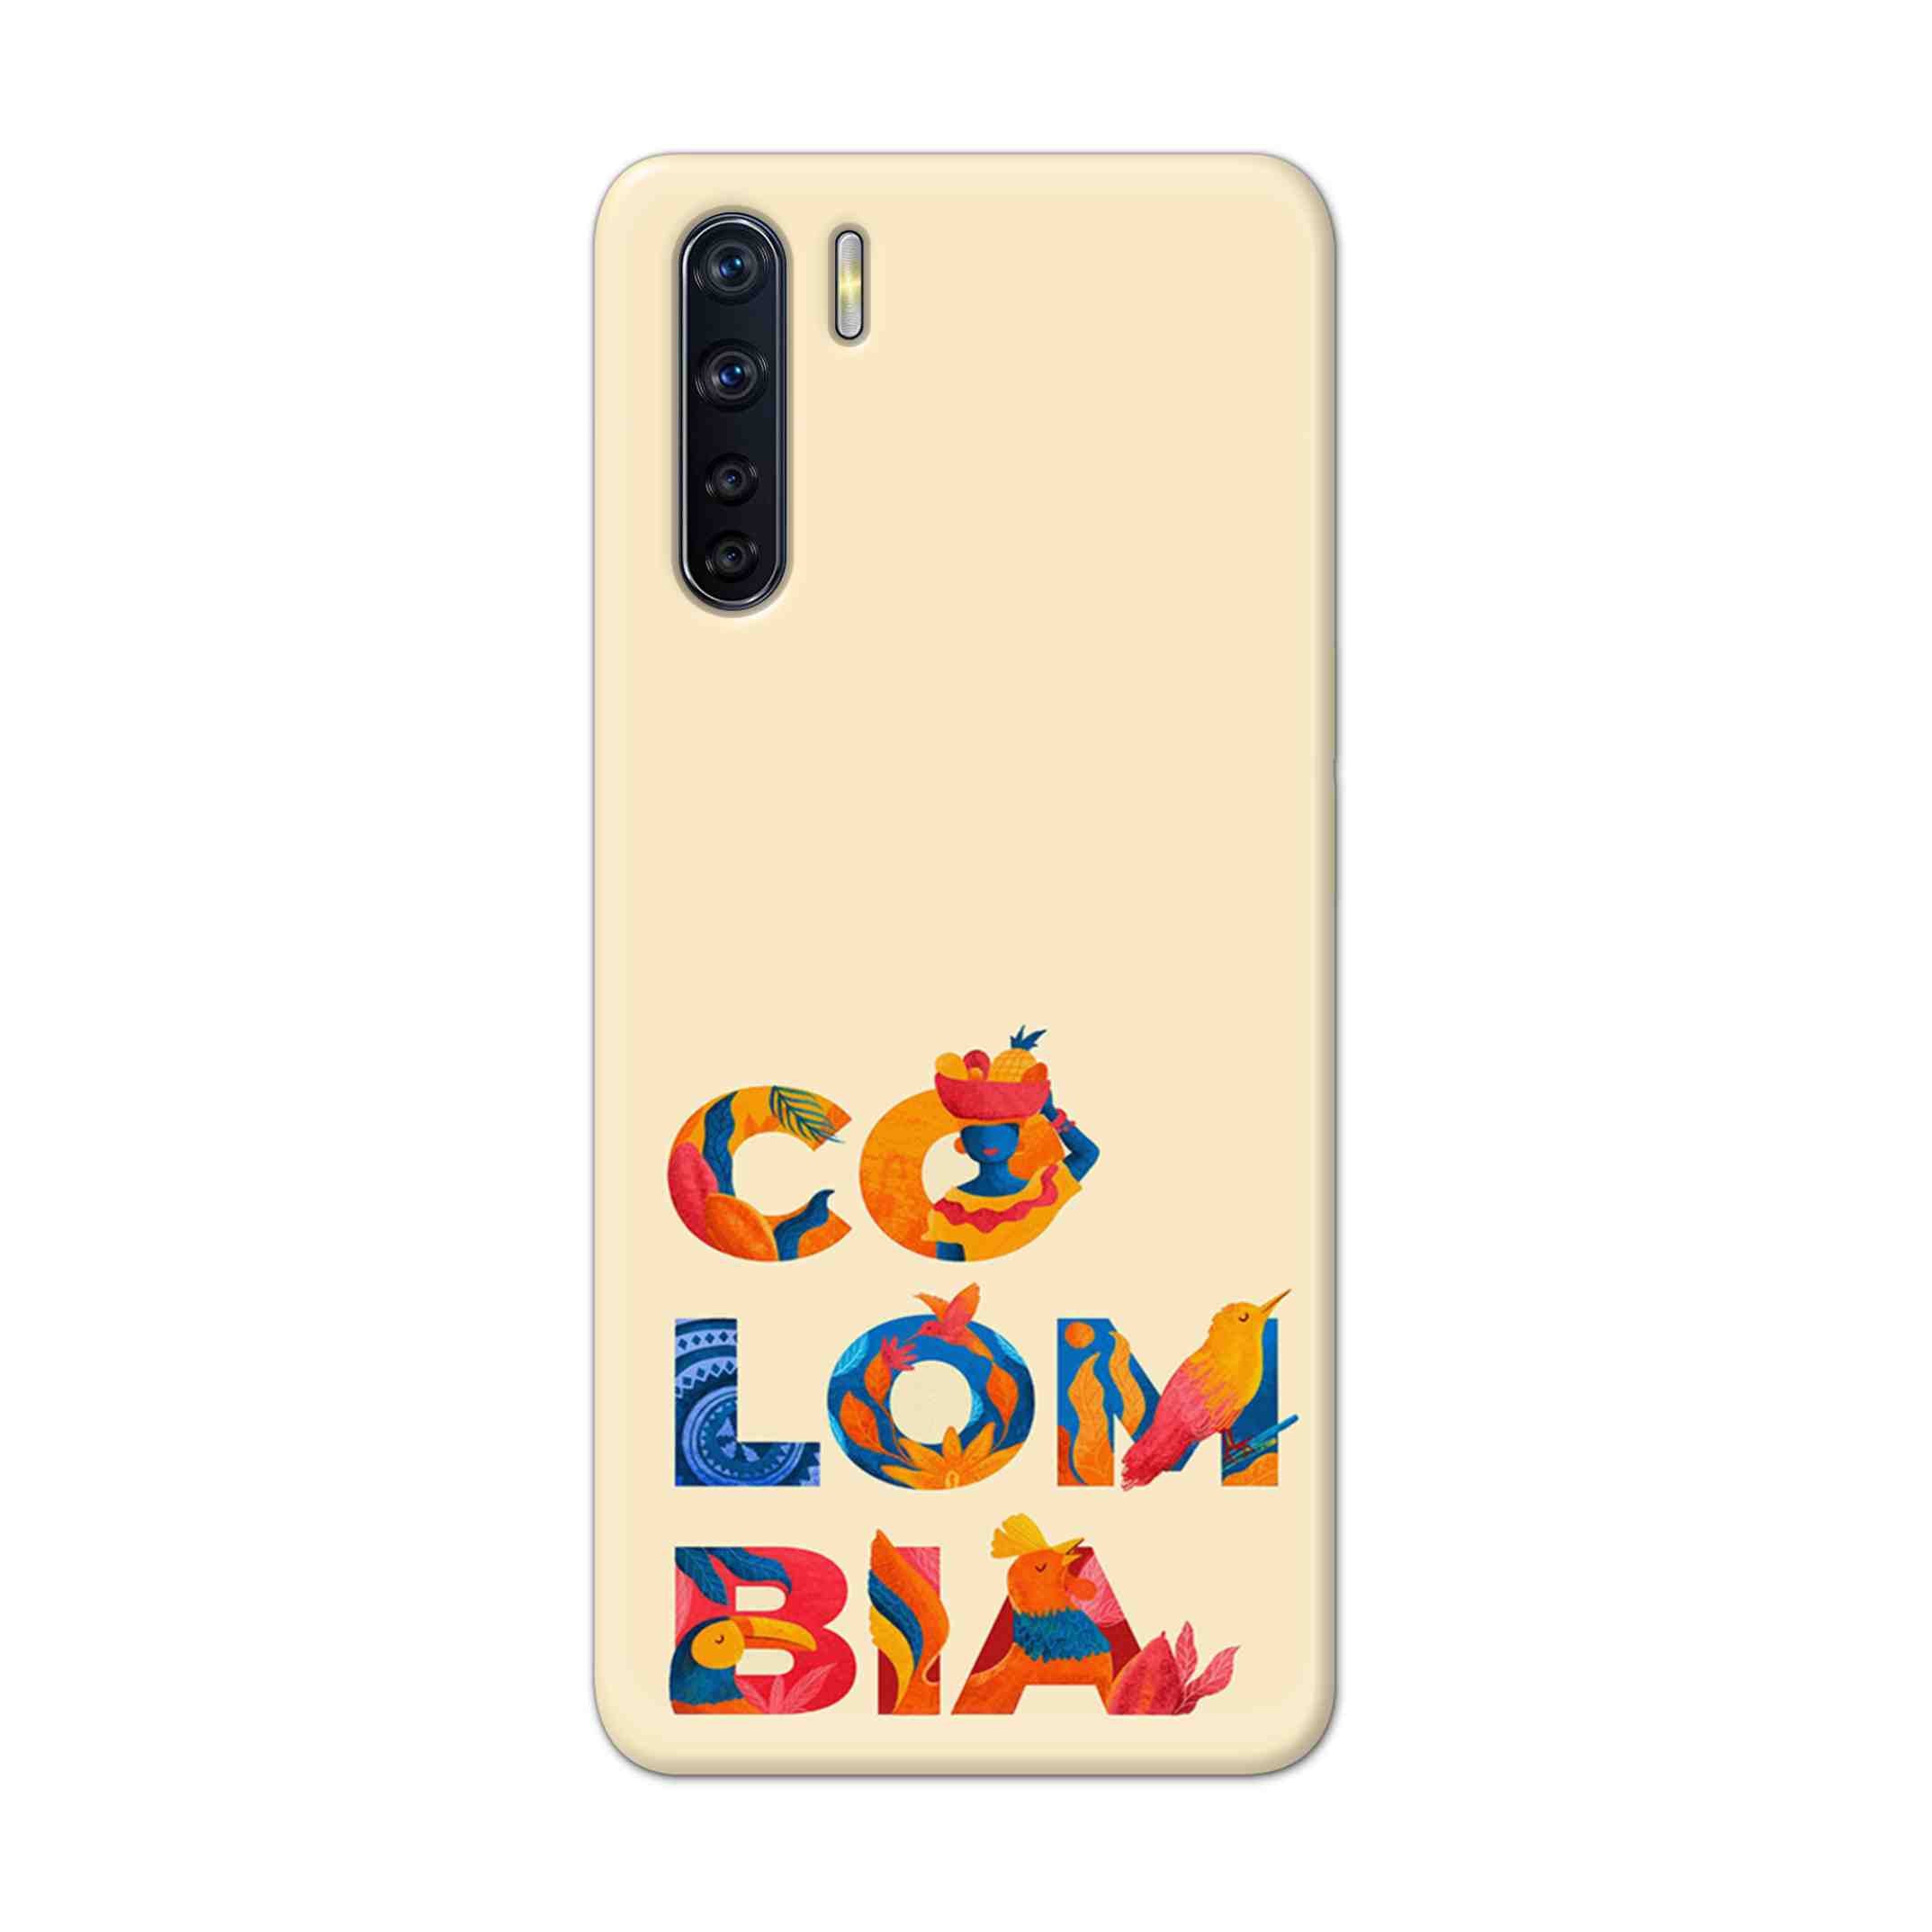 Buy Colombia Hard Back Mobile Phone Case Cover For OPPO F15 Online